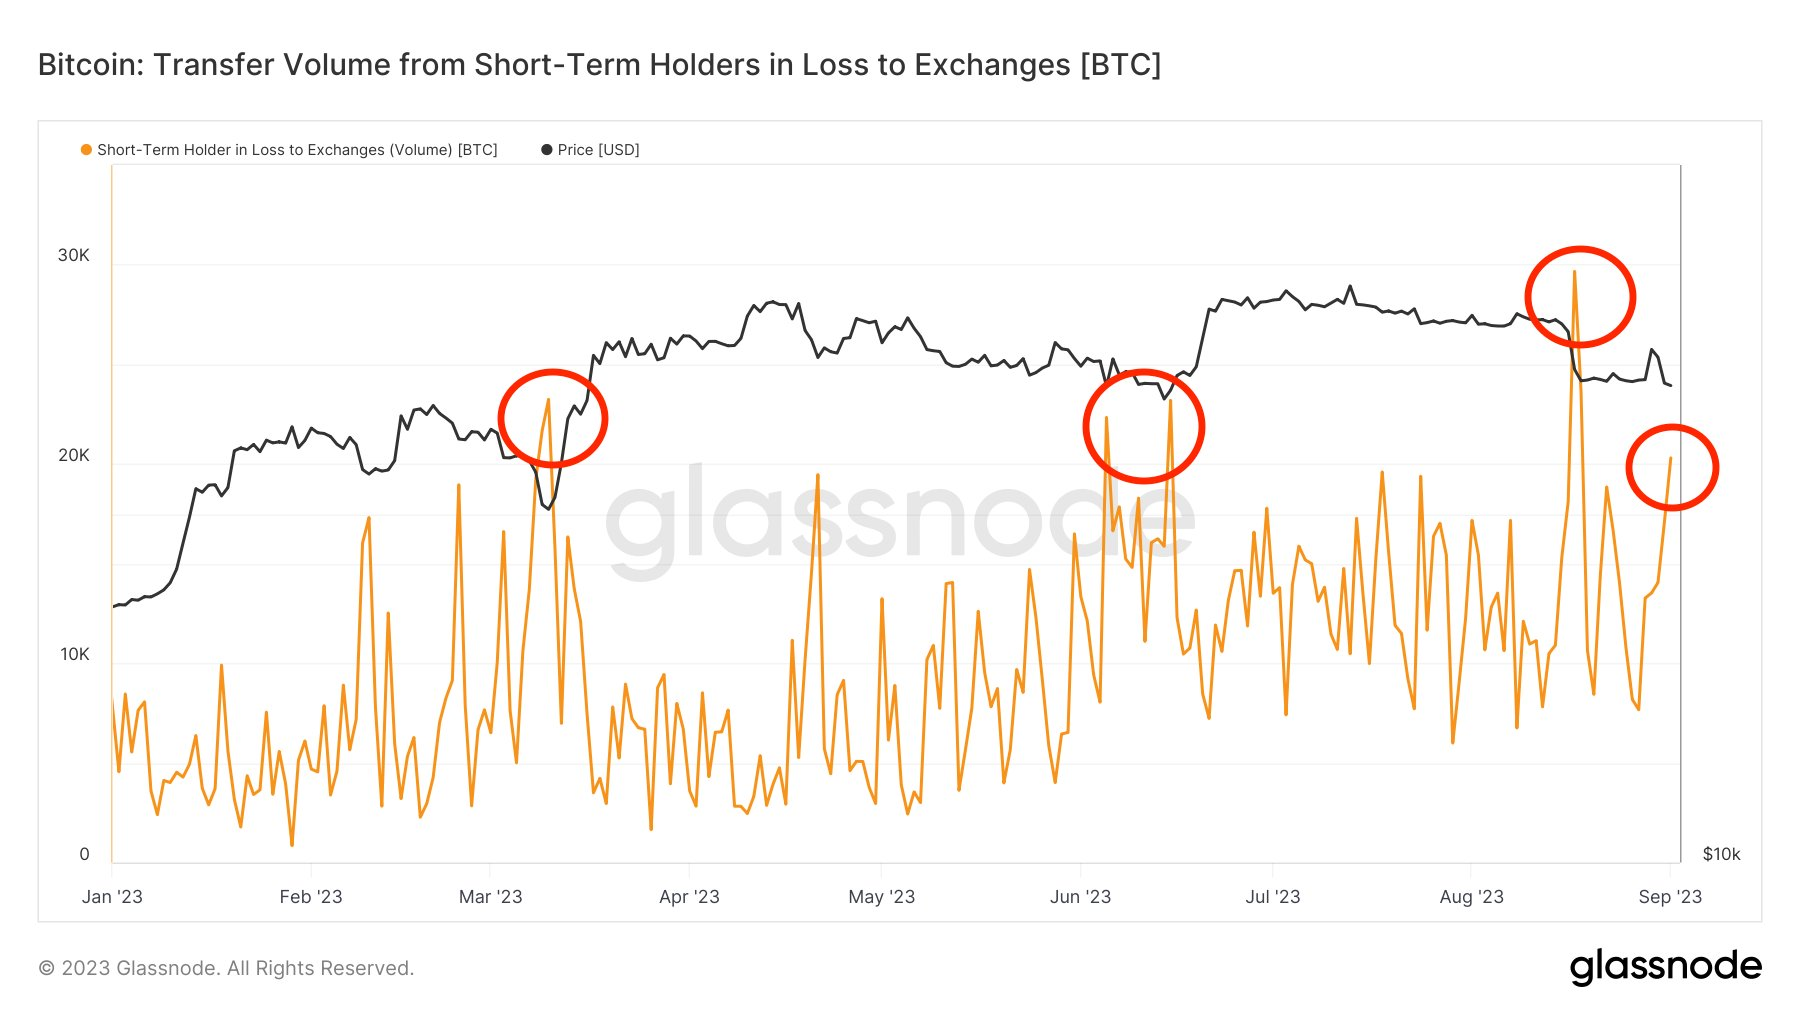 Annotated chart displaying the volume of Bitcoin transfers from short-term holders incurring losses, sourced from James Straten/X